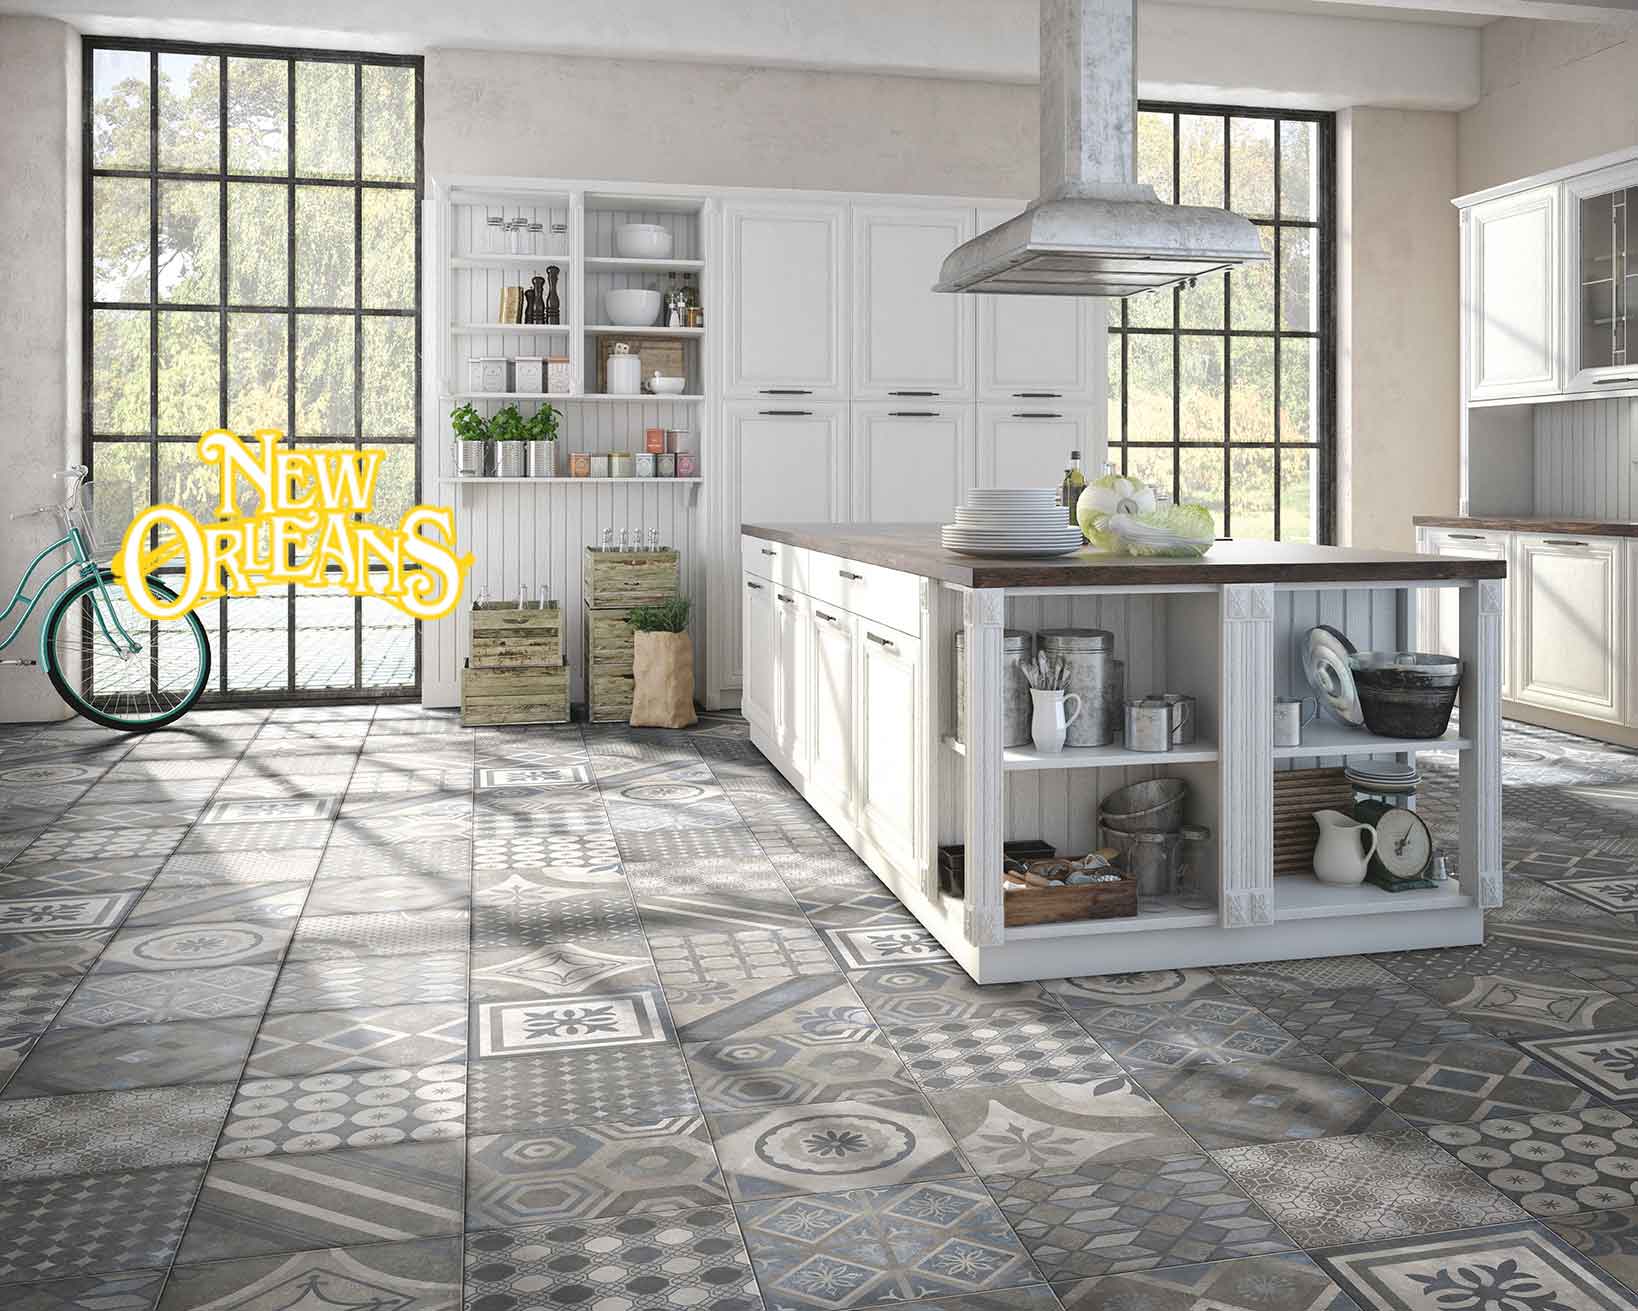 Suppliers of Ceramica Cir New Orleans Floors Tiles